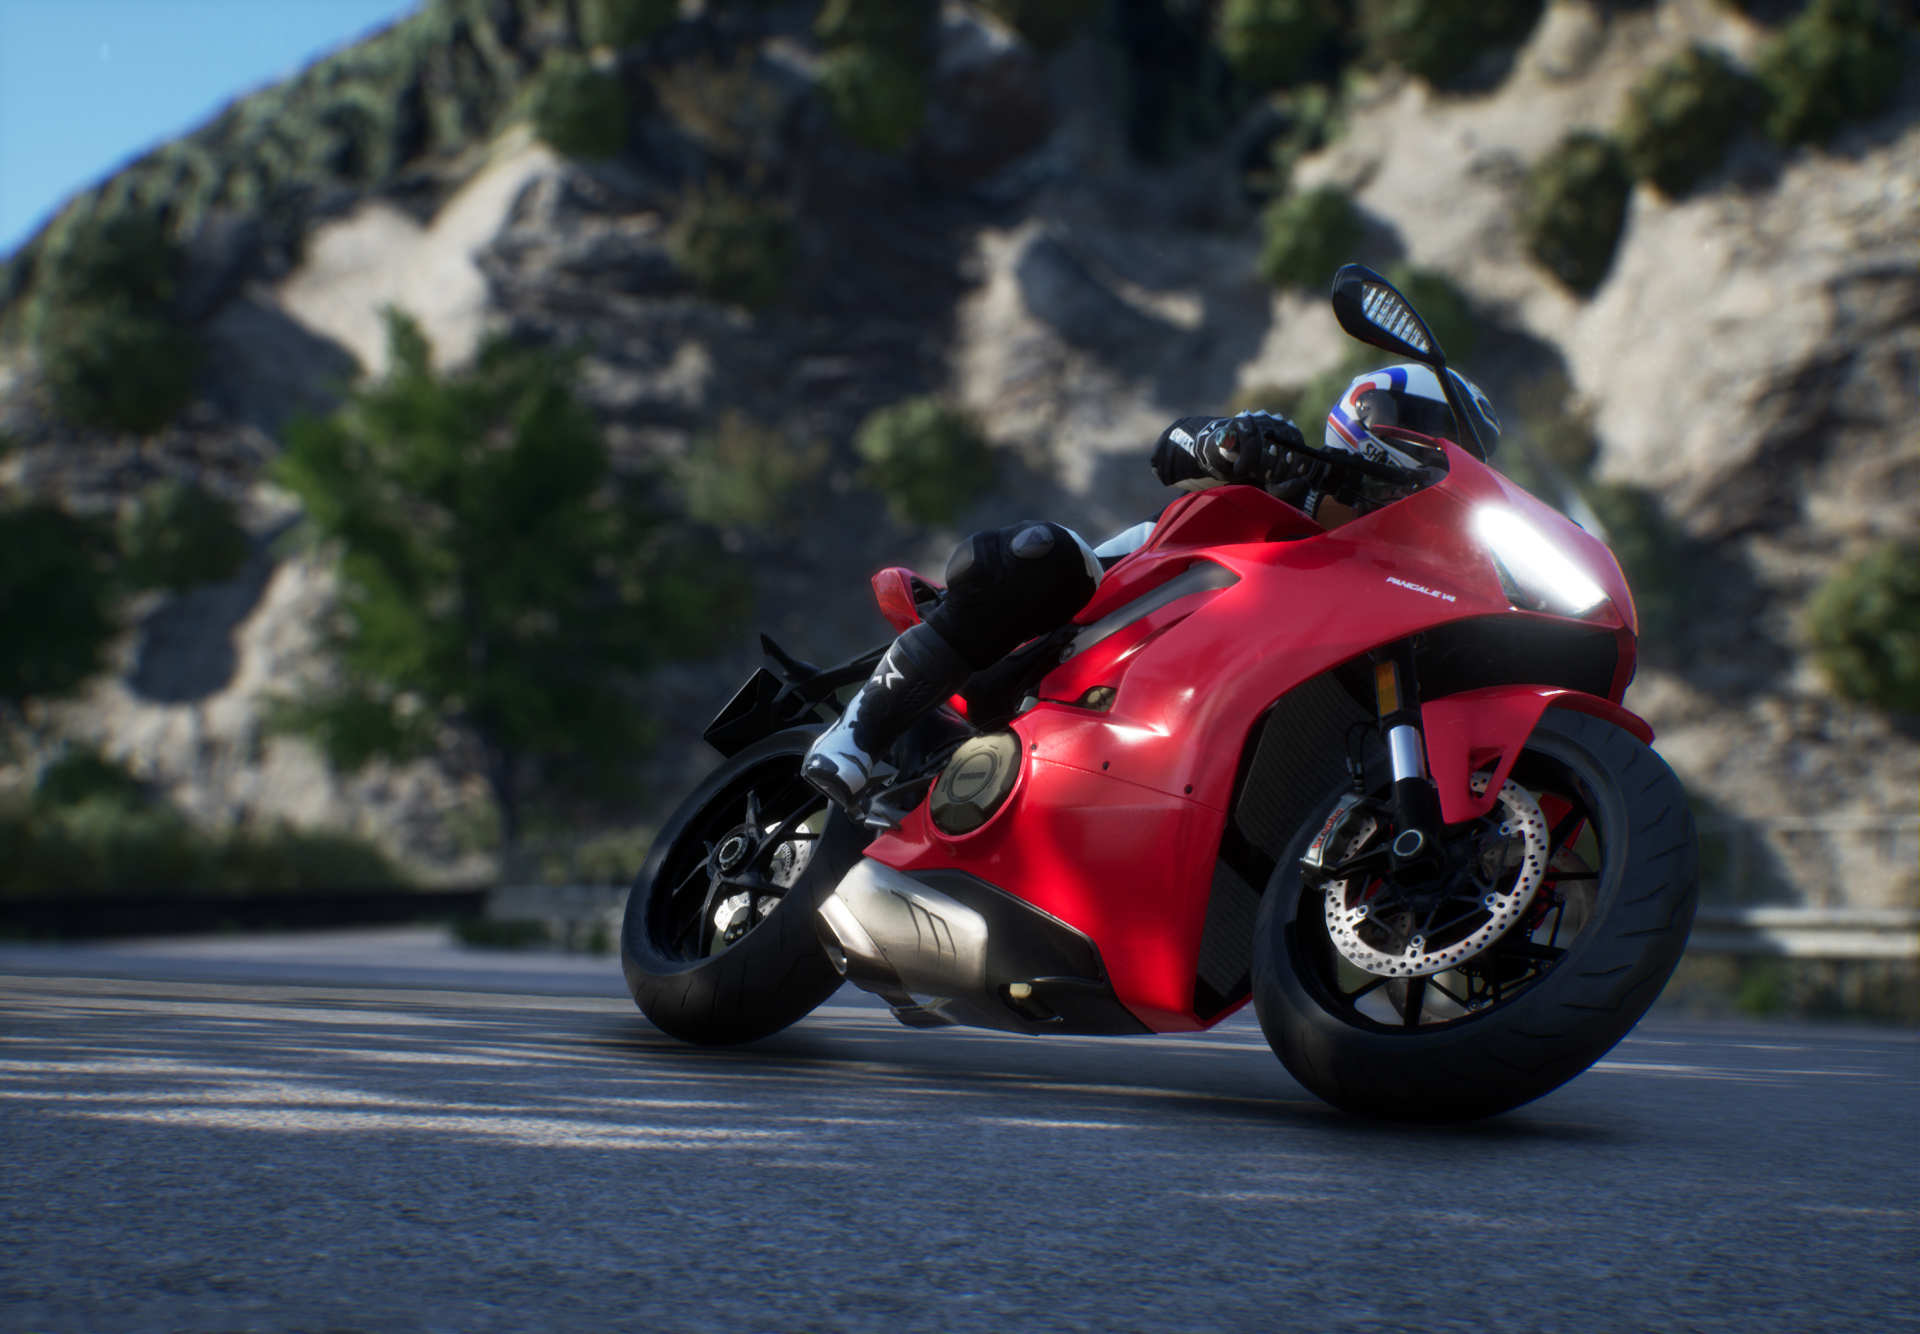 RIDE 3 PS4 Review #29